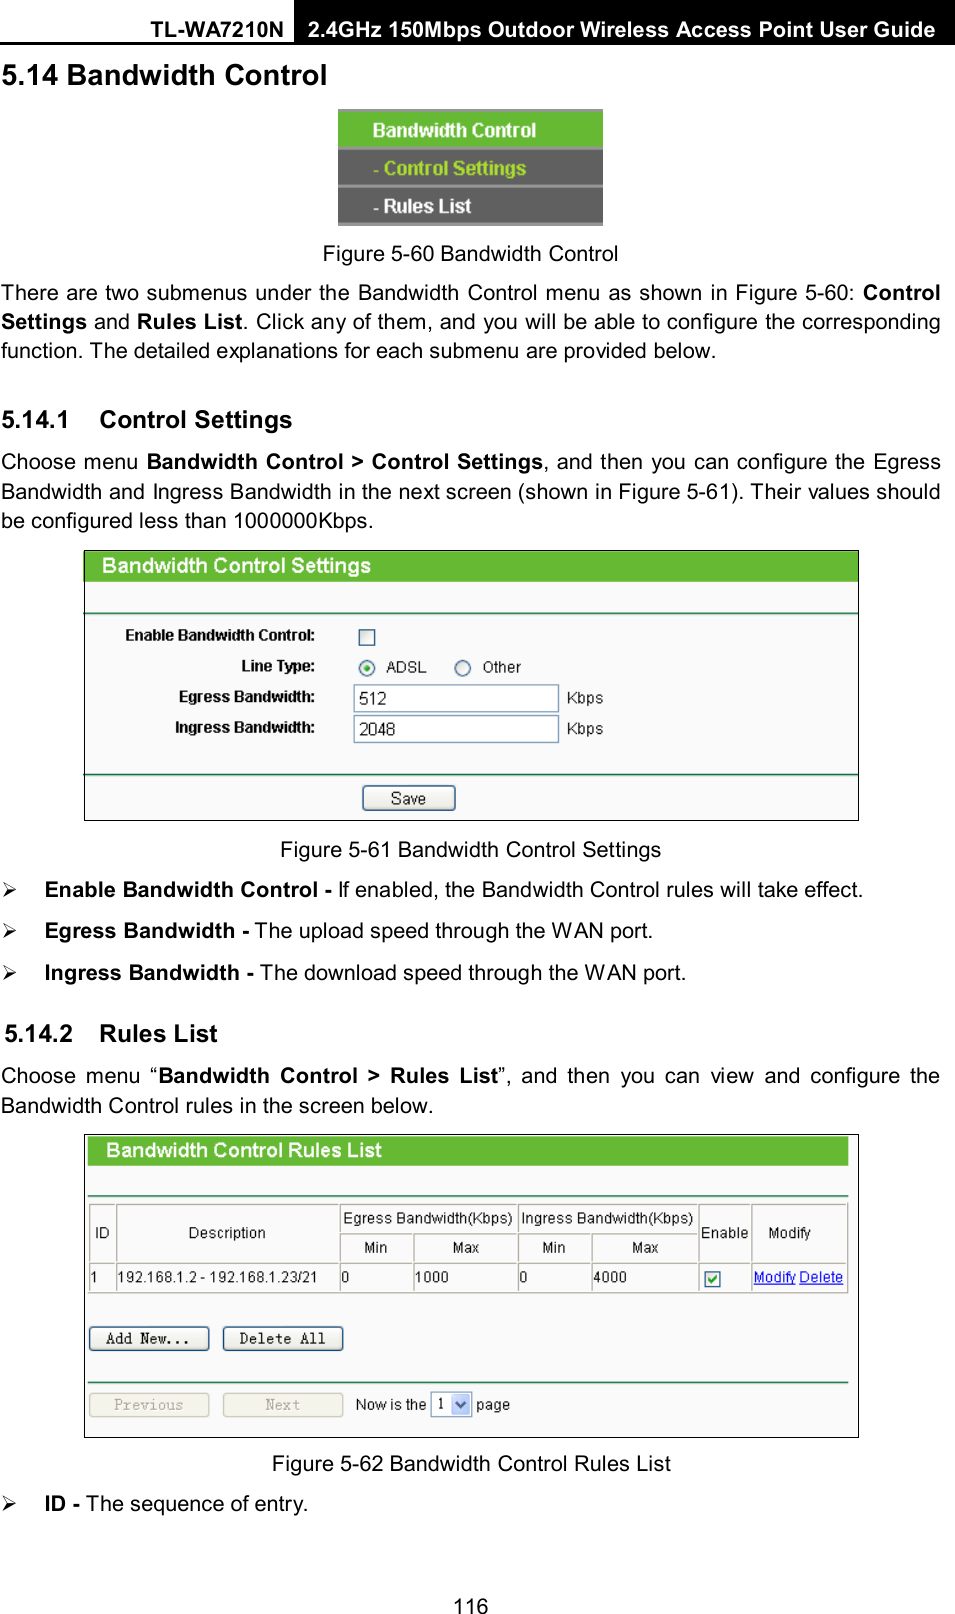 TL-WA7210N 2.4GHz 150Mbps Outdoor Wireless Access Point User Guide  1165.14 Bandwidth Control  Figure 5-60 Bandwidth Control There are two submenus under the Bandwidth Control menu as shown in Figure 5-60: Control Settings and Rules List. Click any of them, and you will be able to configure the corresponding function. The detailed explanations for each submenu are provided below. 5.14.1 Control Settings Choose menu Bandwidth Control &gt; Control Settings, and then you can configure the Egress Bandwidth and Ingress Bandwidth in the next screen (shown in Figure 5-61). Their values should be configured less than 1000000Kbps.  Figure 5-61 Bandwidth Control Settings  Enable Bandwidth Control - If enabled, the Bandwidth Control rules will take effect.    Egress Bandwidth - The upload speed through the WAN port.    Ingress Bandwidth - The download speed through the WAN port. 5.14.2 Rules List Choose menu “Bandwidth Control &gt;  Rules List”, and then you can view and configure the Bandwidth Control rules in the screen below.  Figure 5-62 Bandwidth Control Rules List  ID - The sequence of entry. 